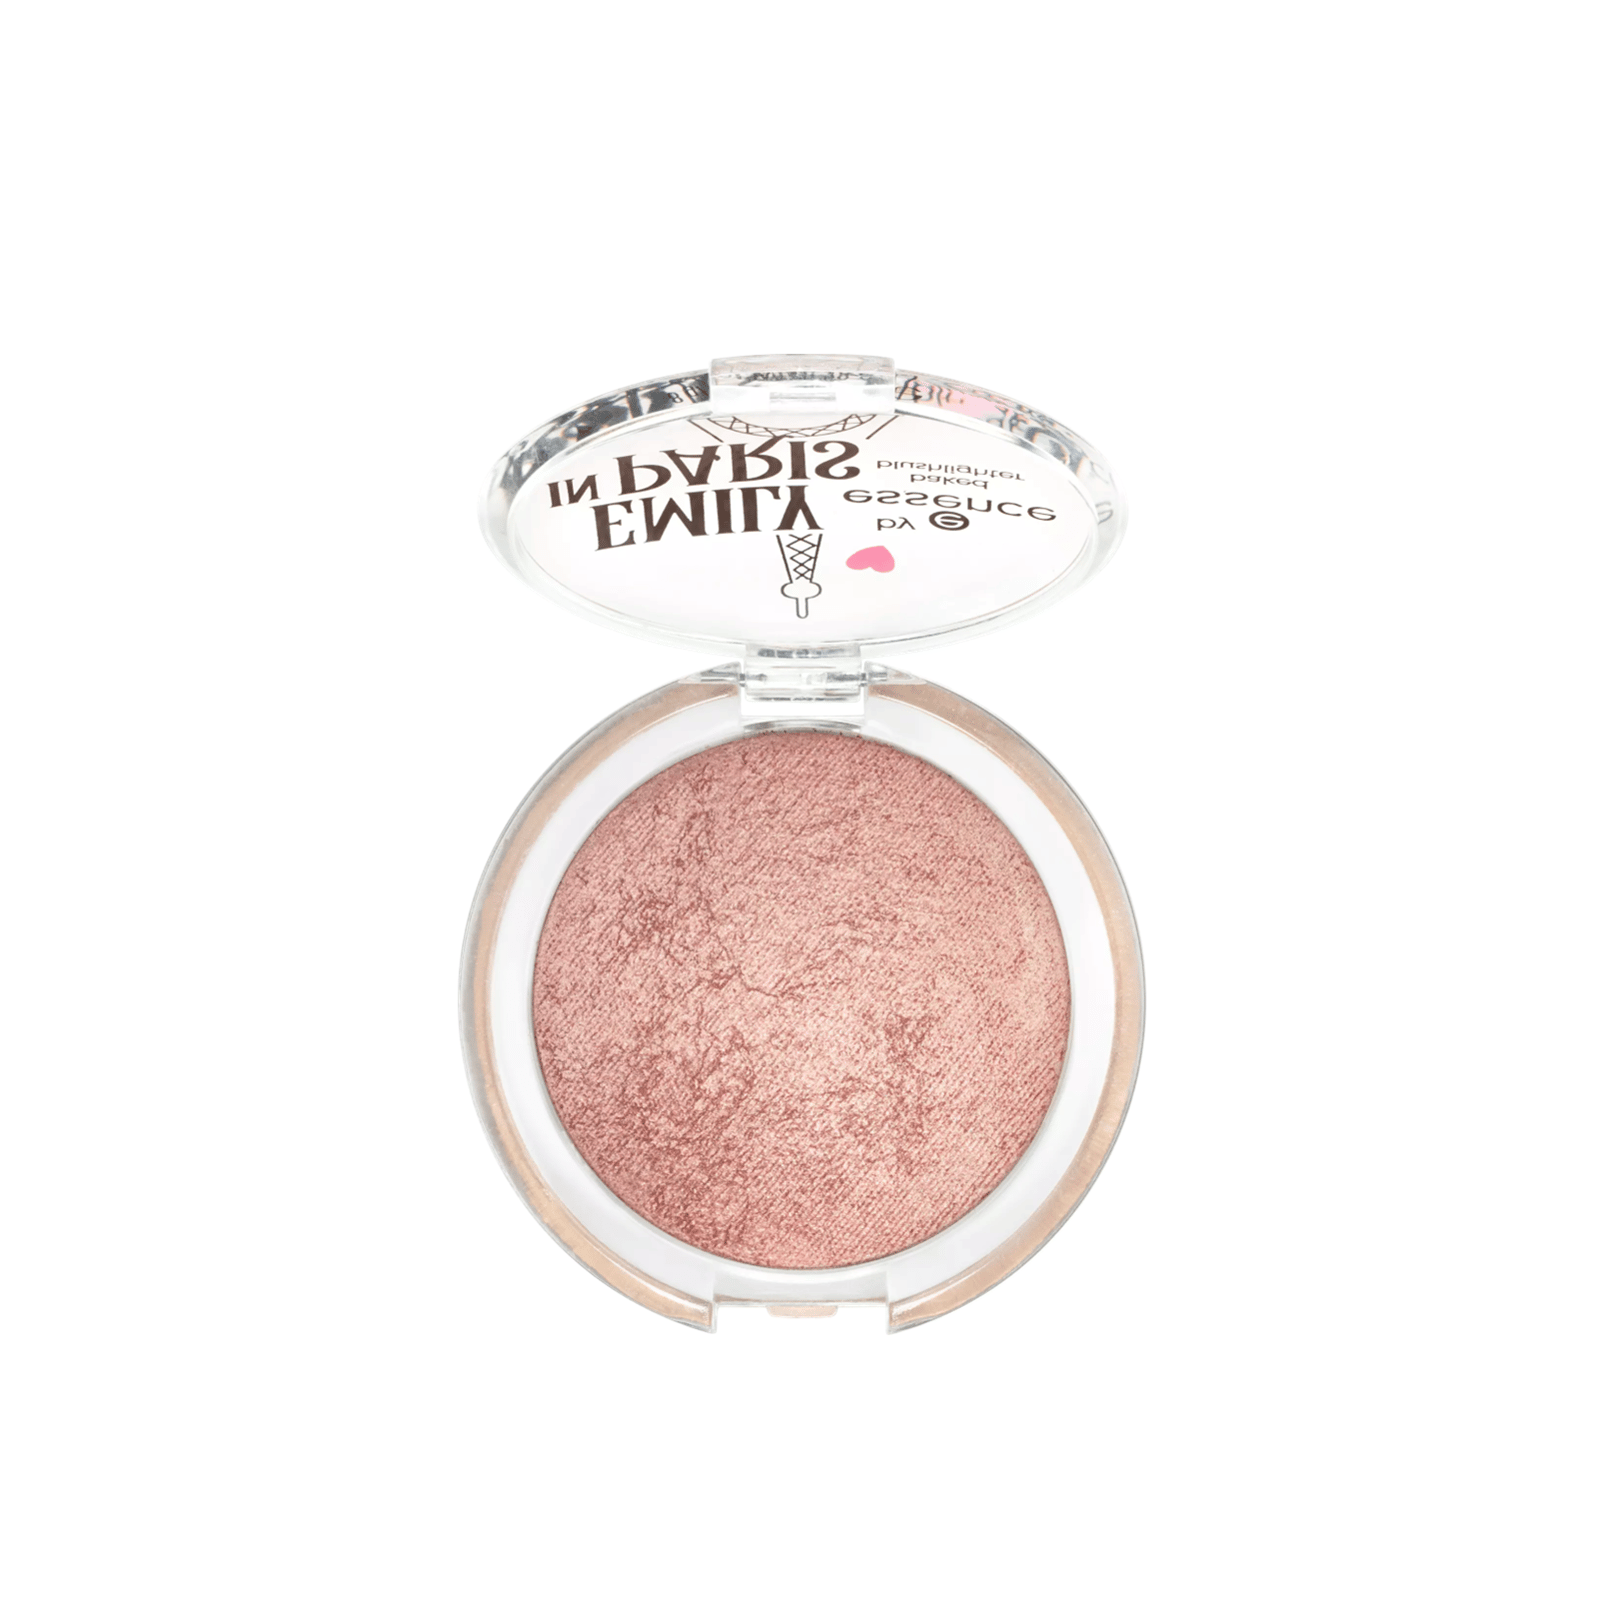 essence Emily In Paris Baked Blushlighter 01 #SayOuiToPossibility 8g (0.28 oz)